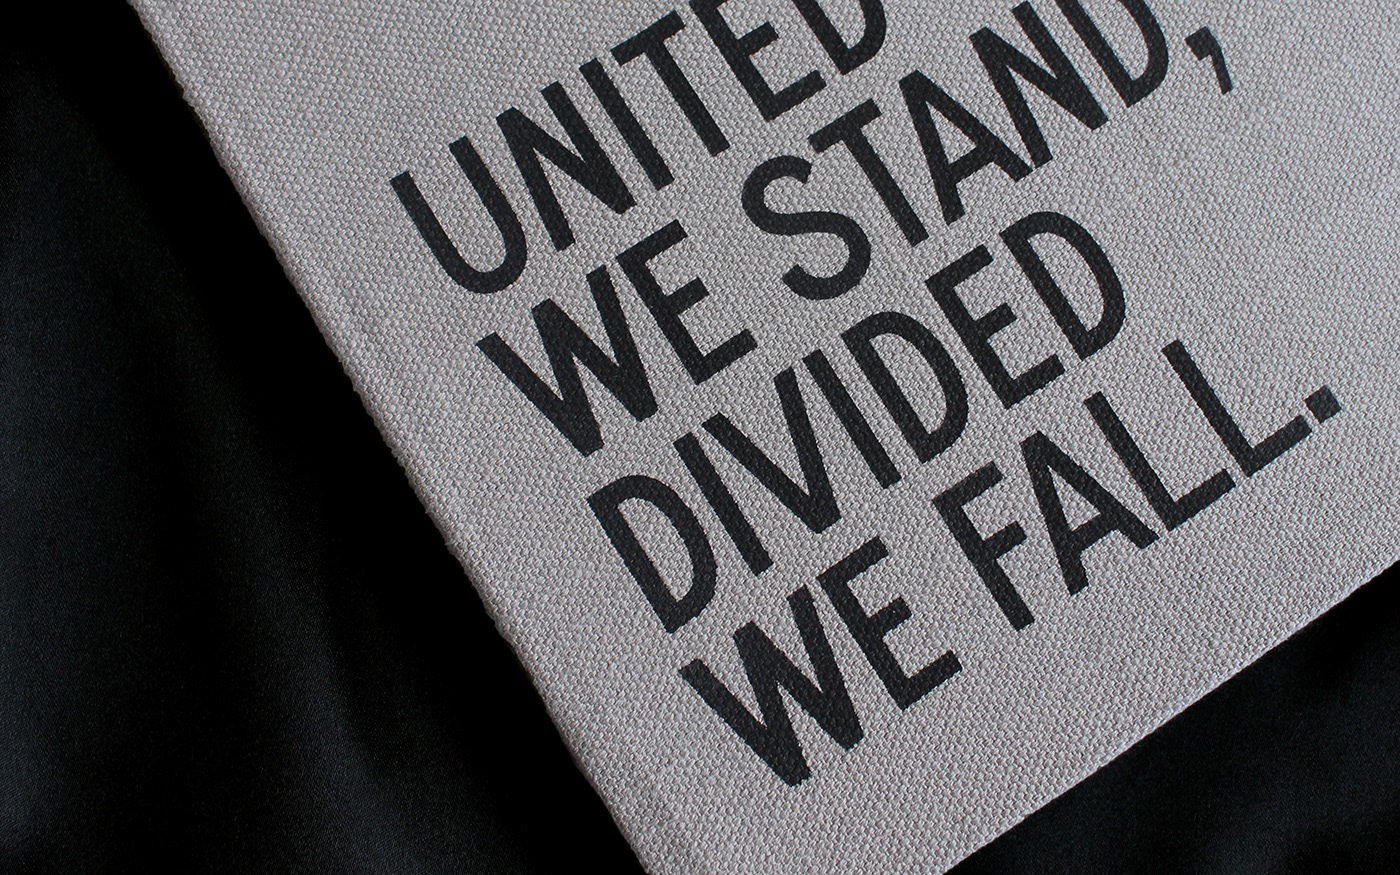 African American History Black Lives Matter Book Binding Civil Rights Movements editorial design  george floyd Photography  screen printing typography   riots